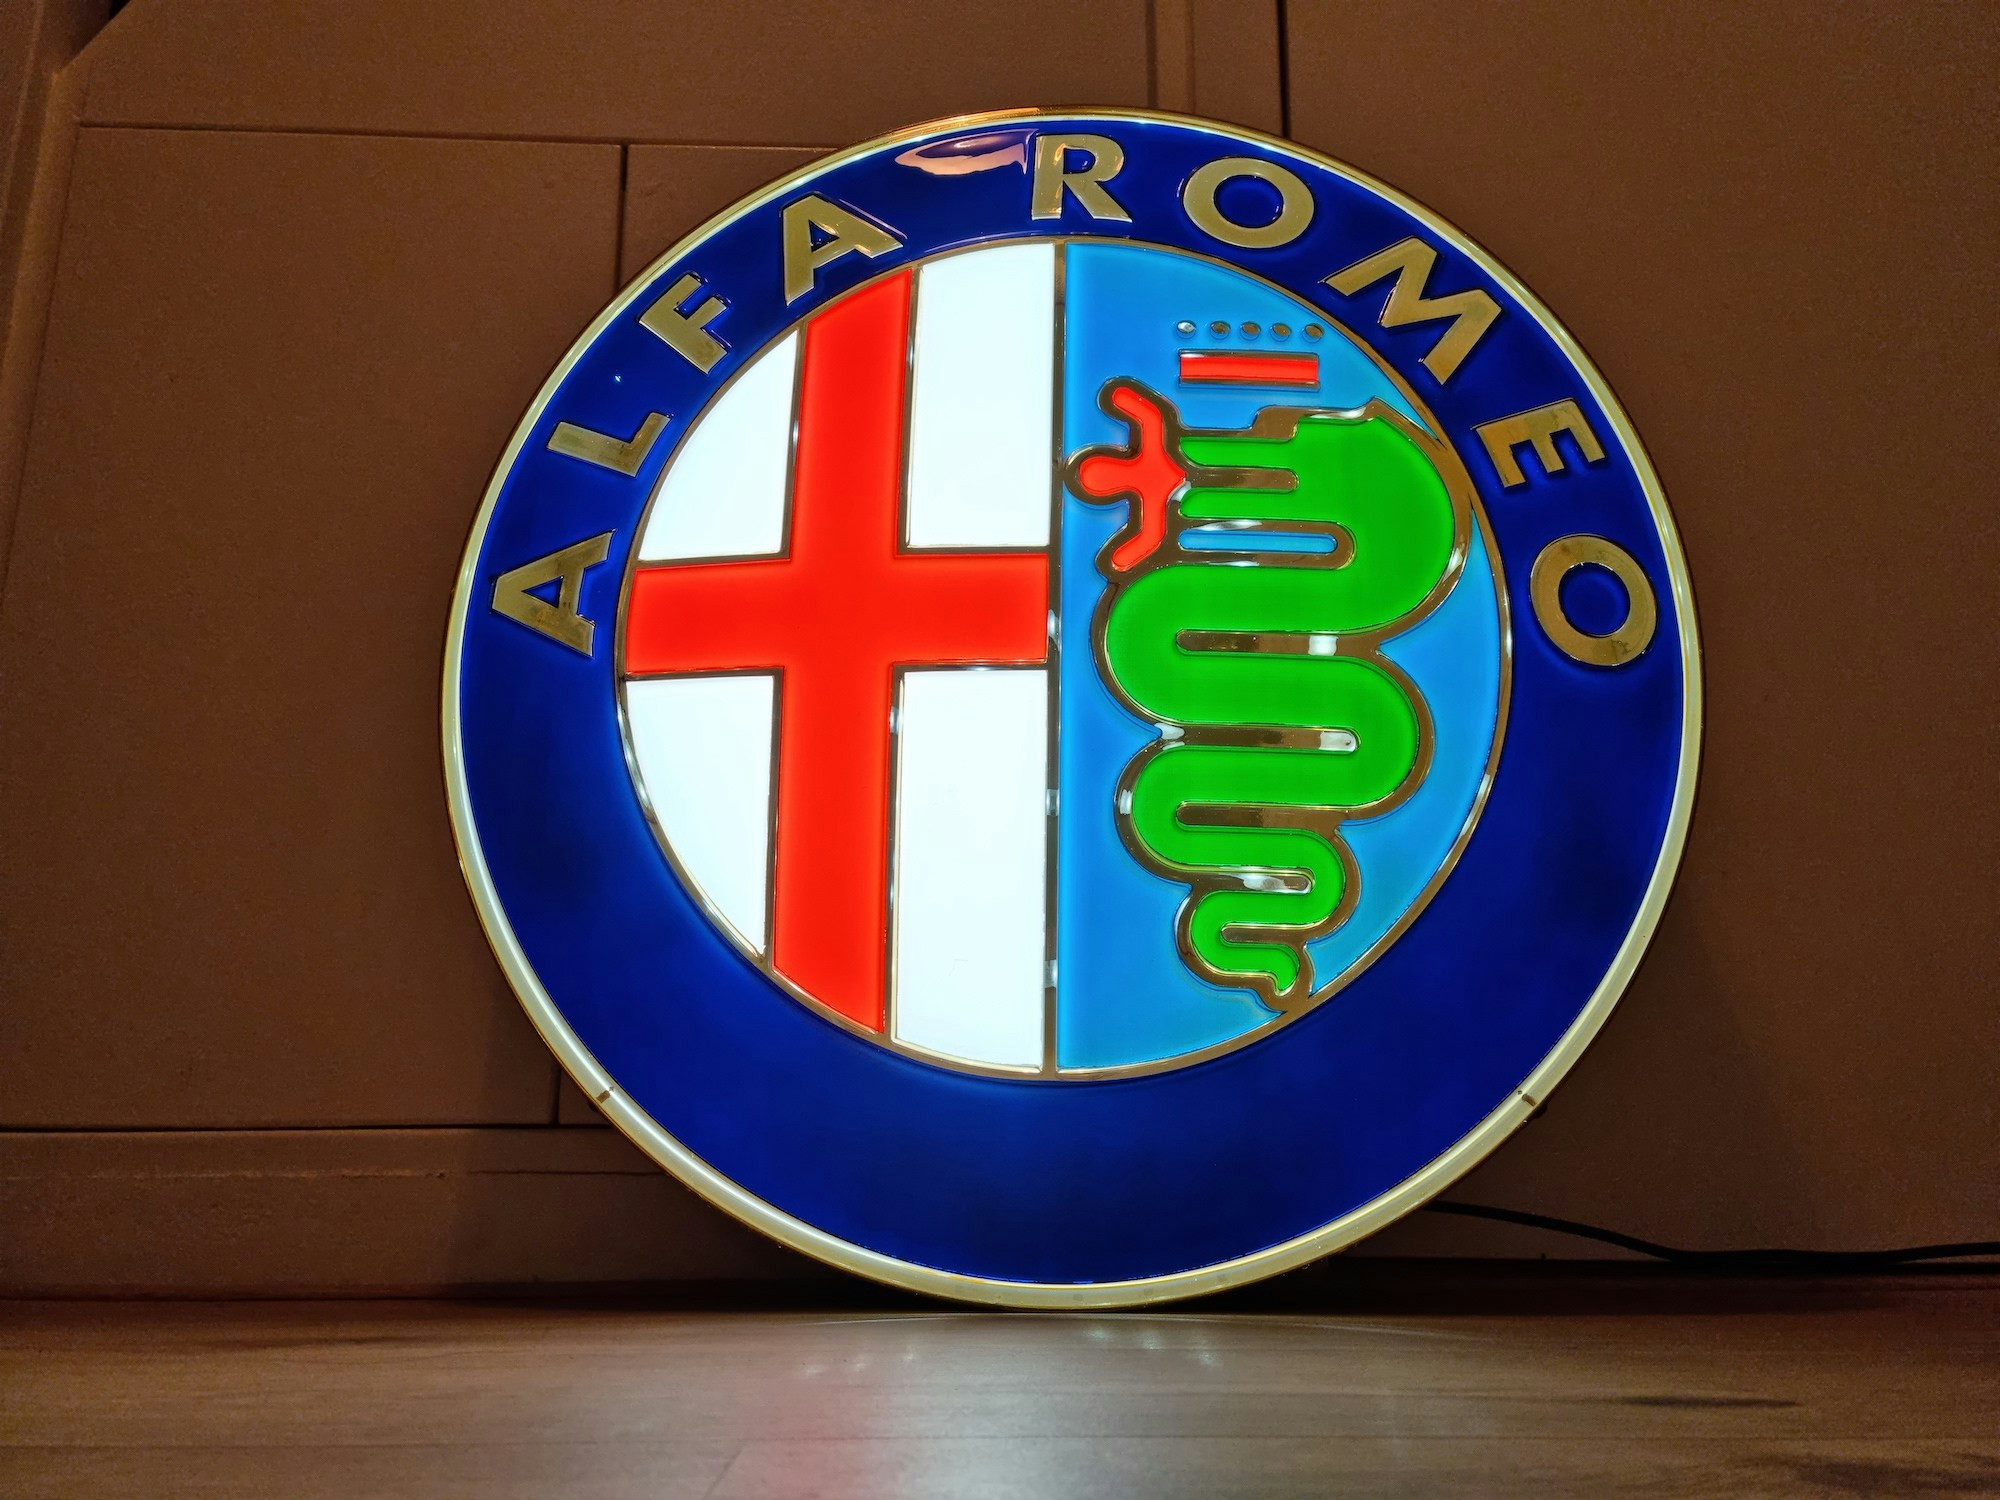 ALFA ROMEO ILLUMINATED SIGN for sale by auction in Smallingerland,  Netherlands